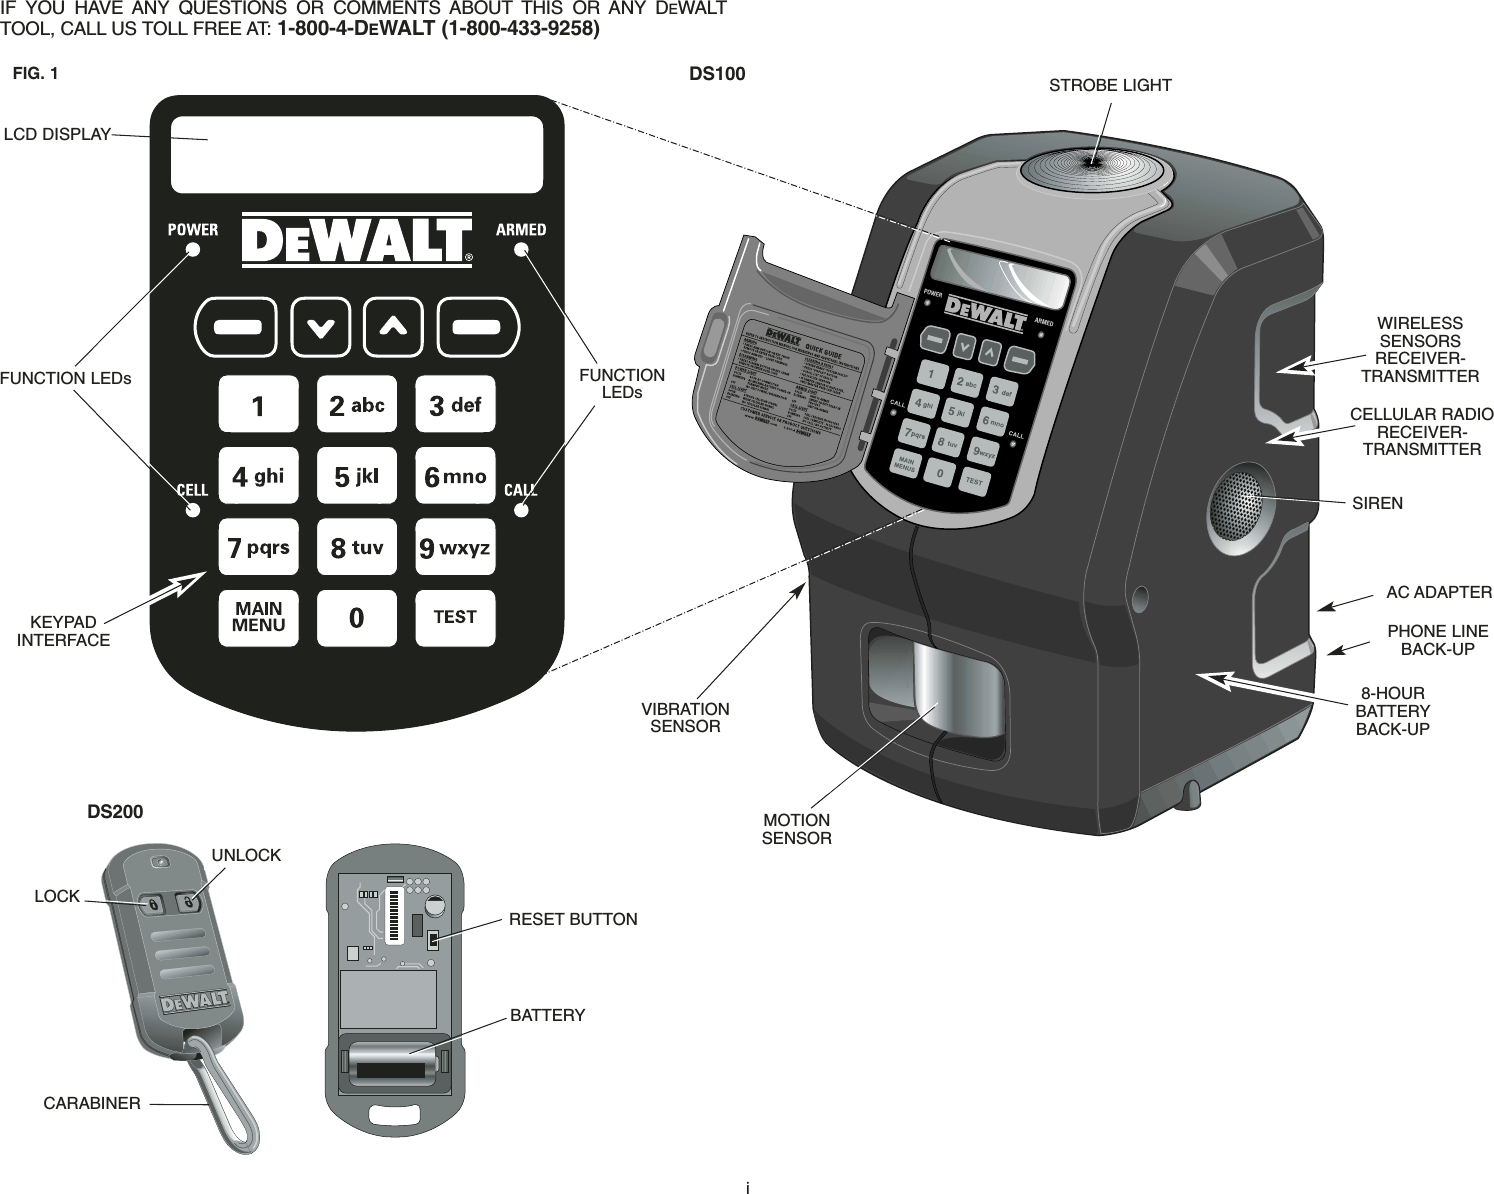 iIF YOU HAVE ANY QUESTIONS OR COMMENTS ABOUT THIS OR ANY DEWALTTOOL, CALL US TOLL FREE AT: 1-800-4-DEWALT (1-800-433-9258) LCD DISPLAYFUNCTION LEDs FUNCTIONLEDsKEYPAD INTERFACEVIBRATIONSENSORMOTIONSENSORPHONE LINEBACK-UP8-HOURBATTERYBACK-UPAC ADAPTERWIRELESS SENSORS RECEIVER-TRANSMITTERCELLULAR RADIORECEIVER-TRANSMITTERSTROBE LIGHTRESET BUTTONBATTERYSIRENDS100DS200UNLOCKLOCKCARABINERFIG. 1